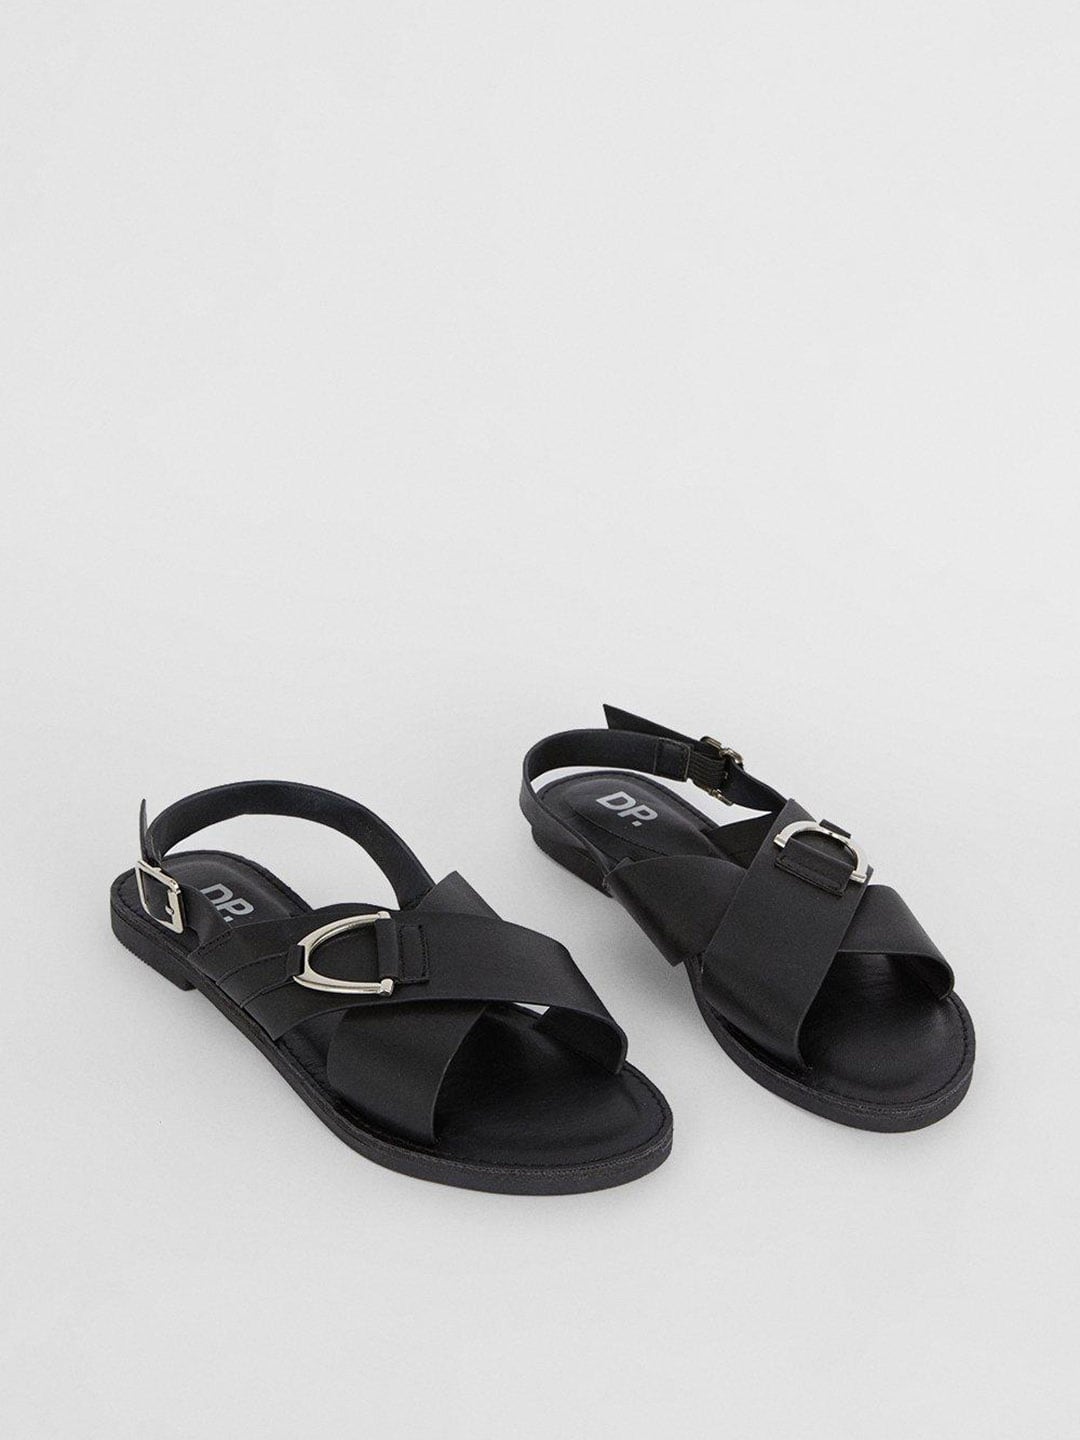 DOROTHY PERKINS Women Open Toe Flats with Buckle Detail Price in India